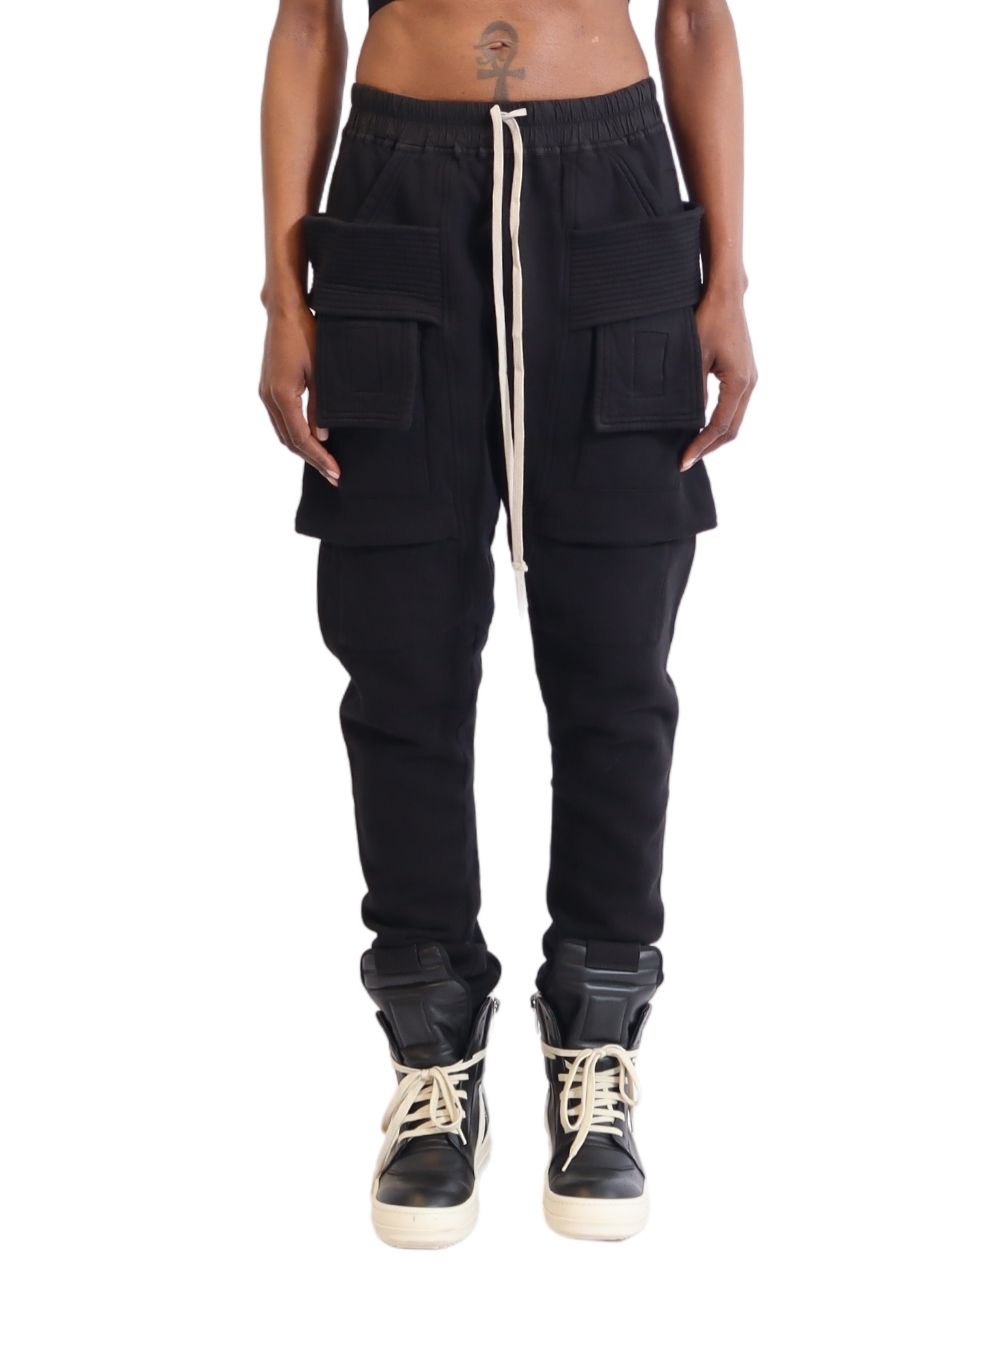 HUFRick Owens 15ss Creatch Cargo Pants DS